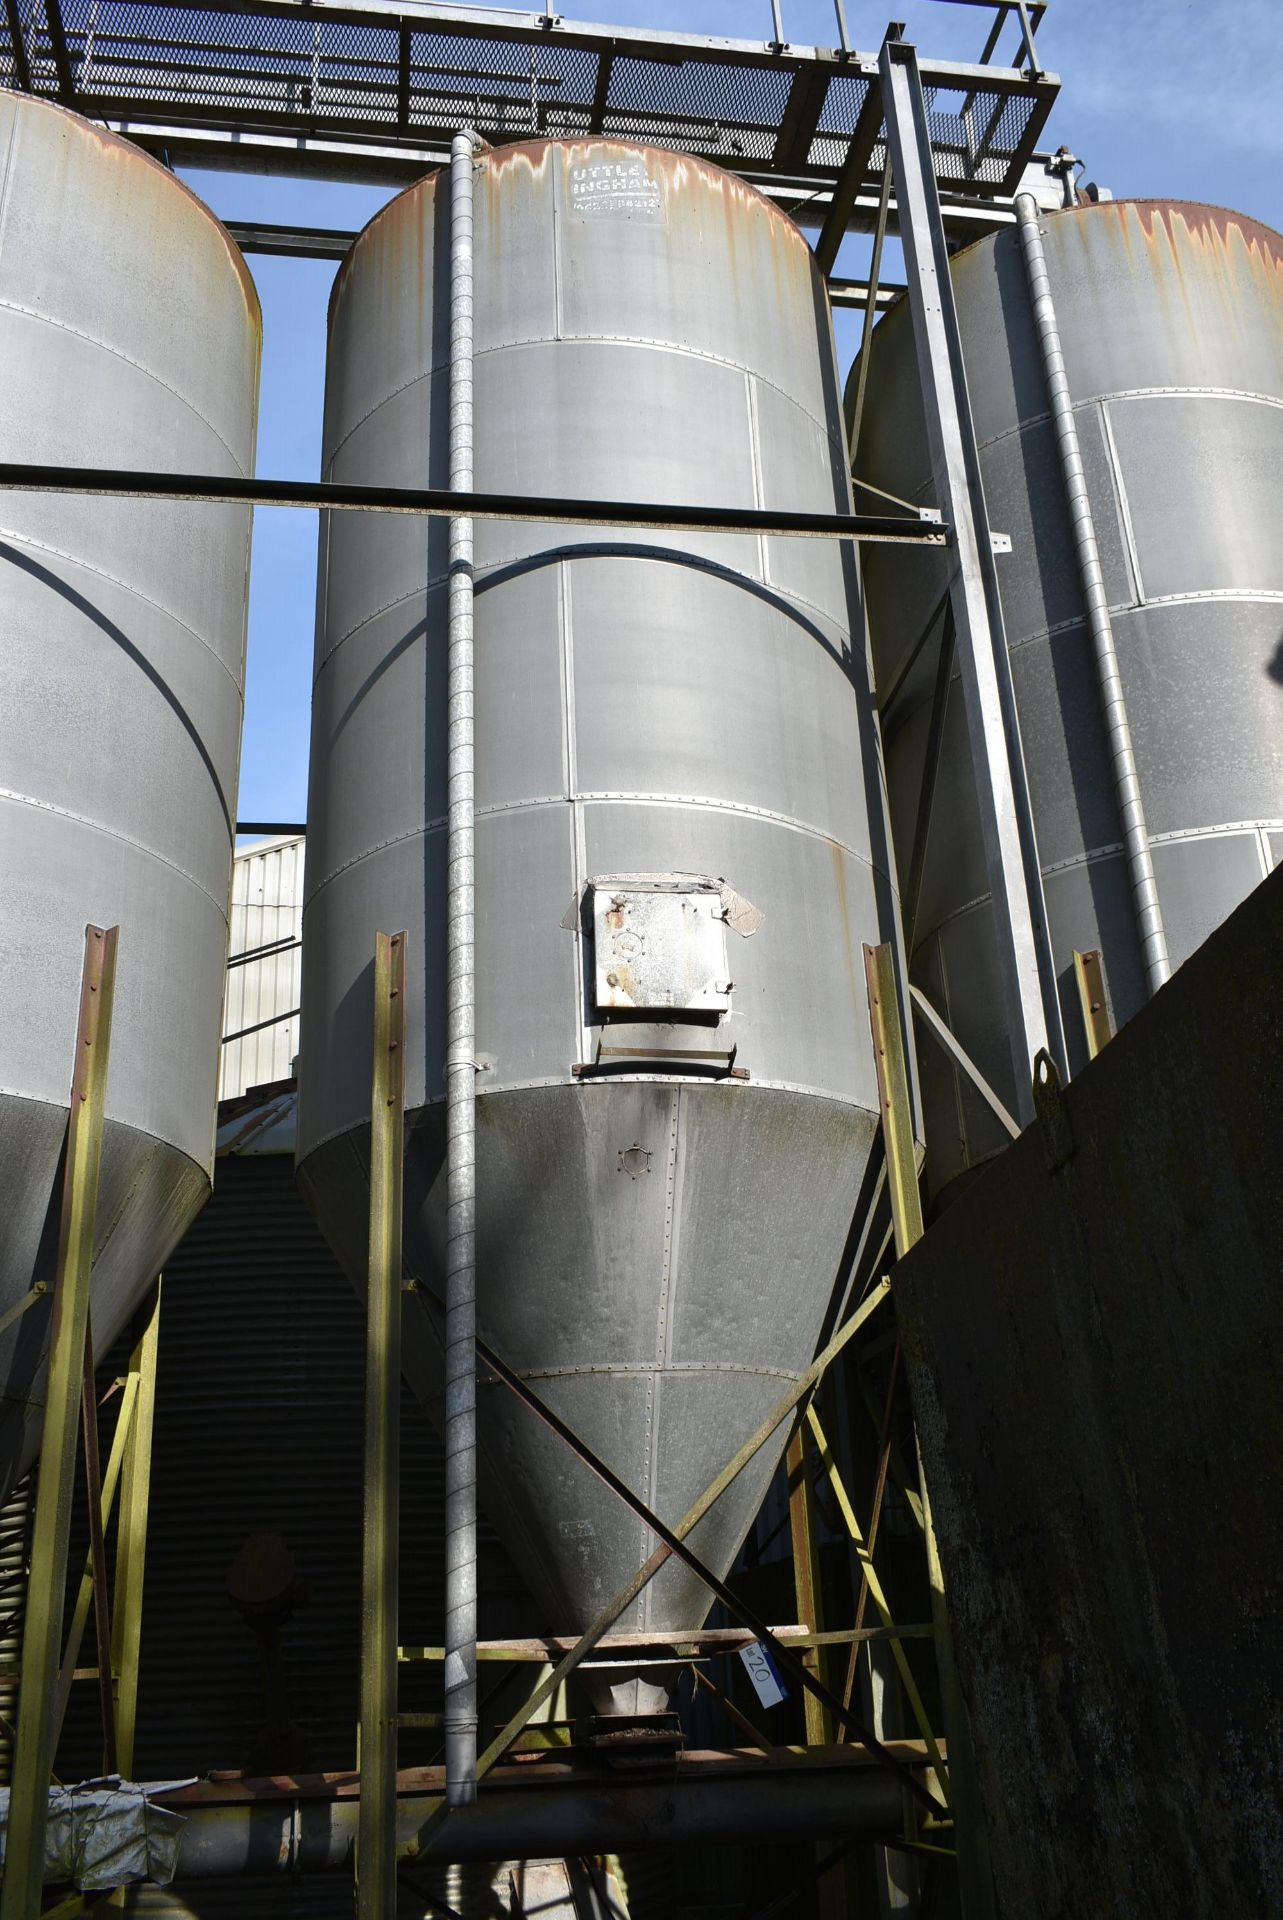 Uttley 18-20 tonne (rape capacity) Galvanised Steel Storage Silo, approx. 2.8m dia. x approx. 8m - Image 3 of 3